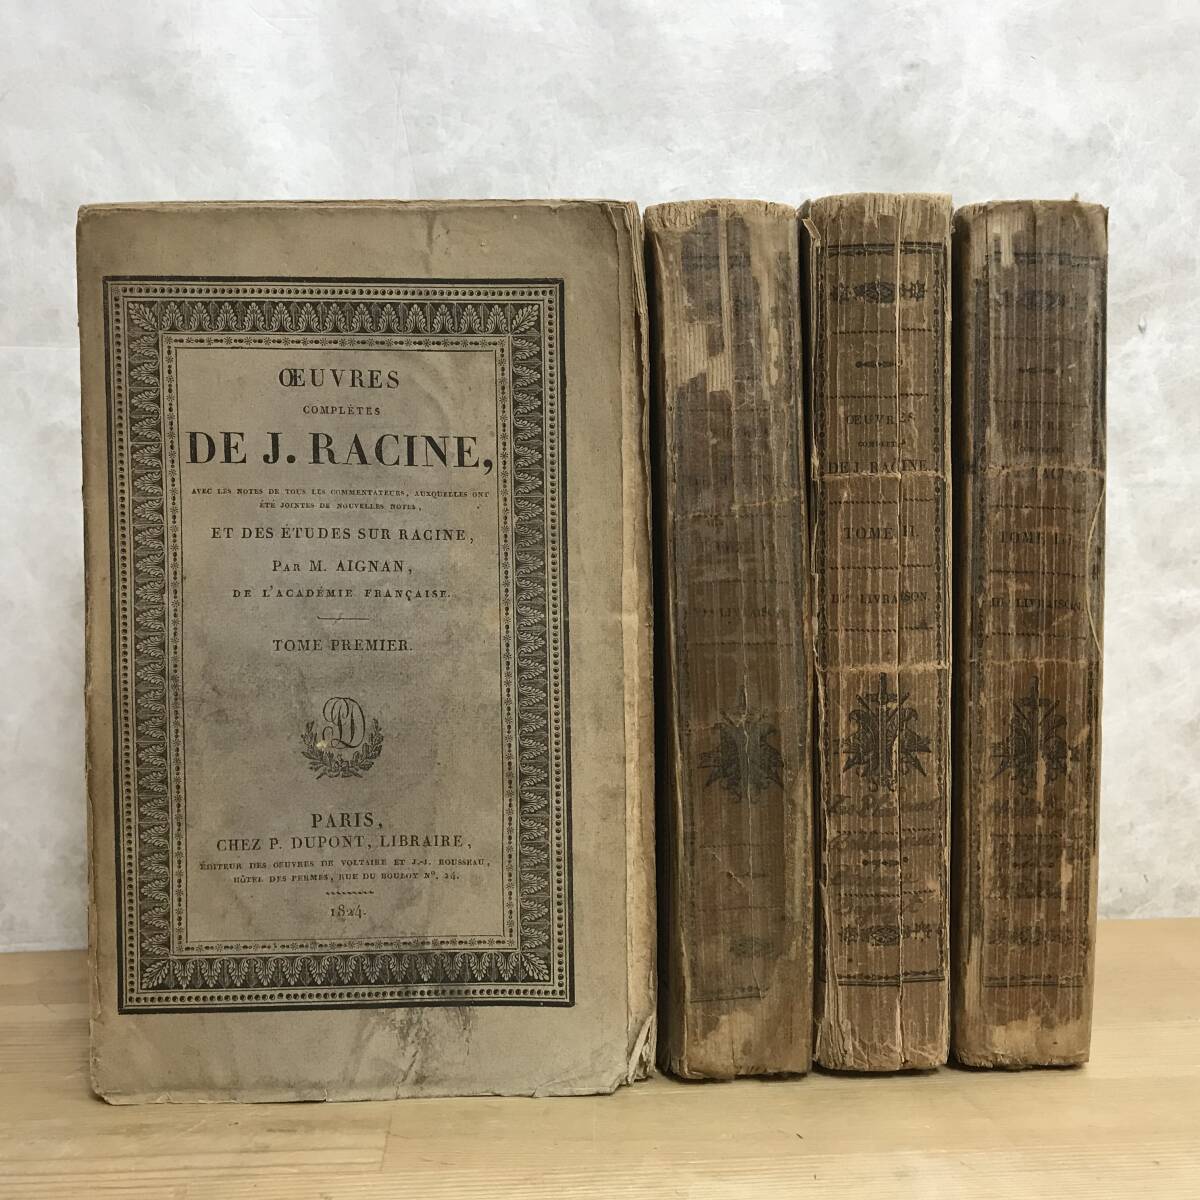 i10●JEAN RACINE 4 old books about Jean Racine 1824 17th century French literature/French language/tragic writer/classicism 240314, Painting, Art Book, Collection, Art Book